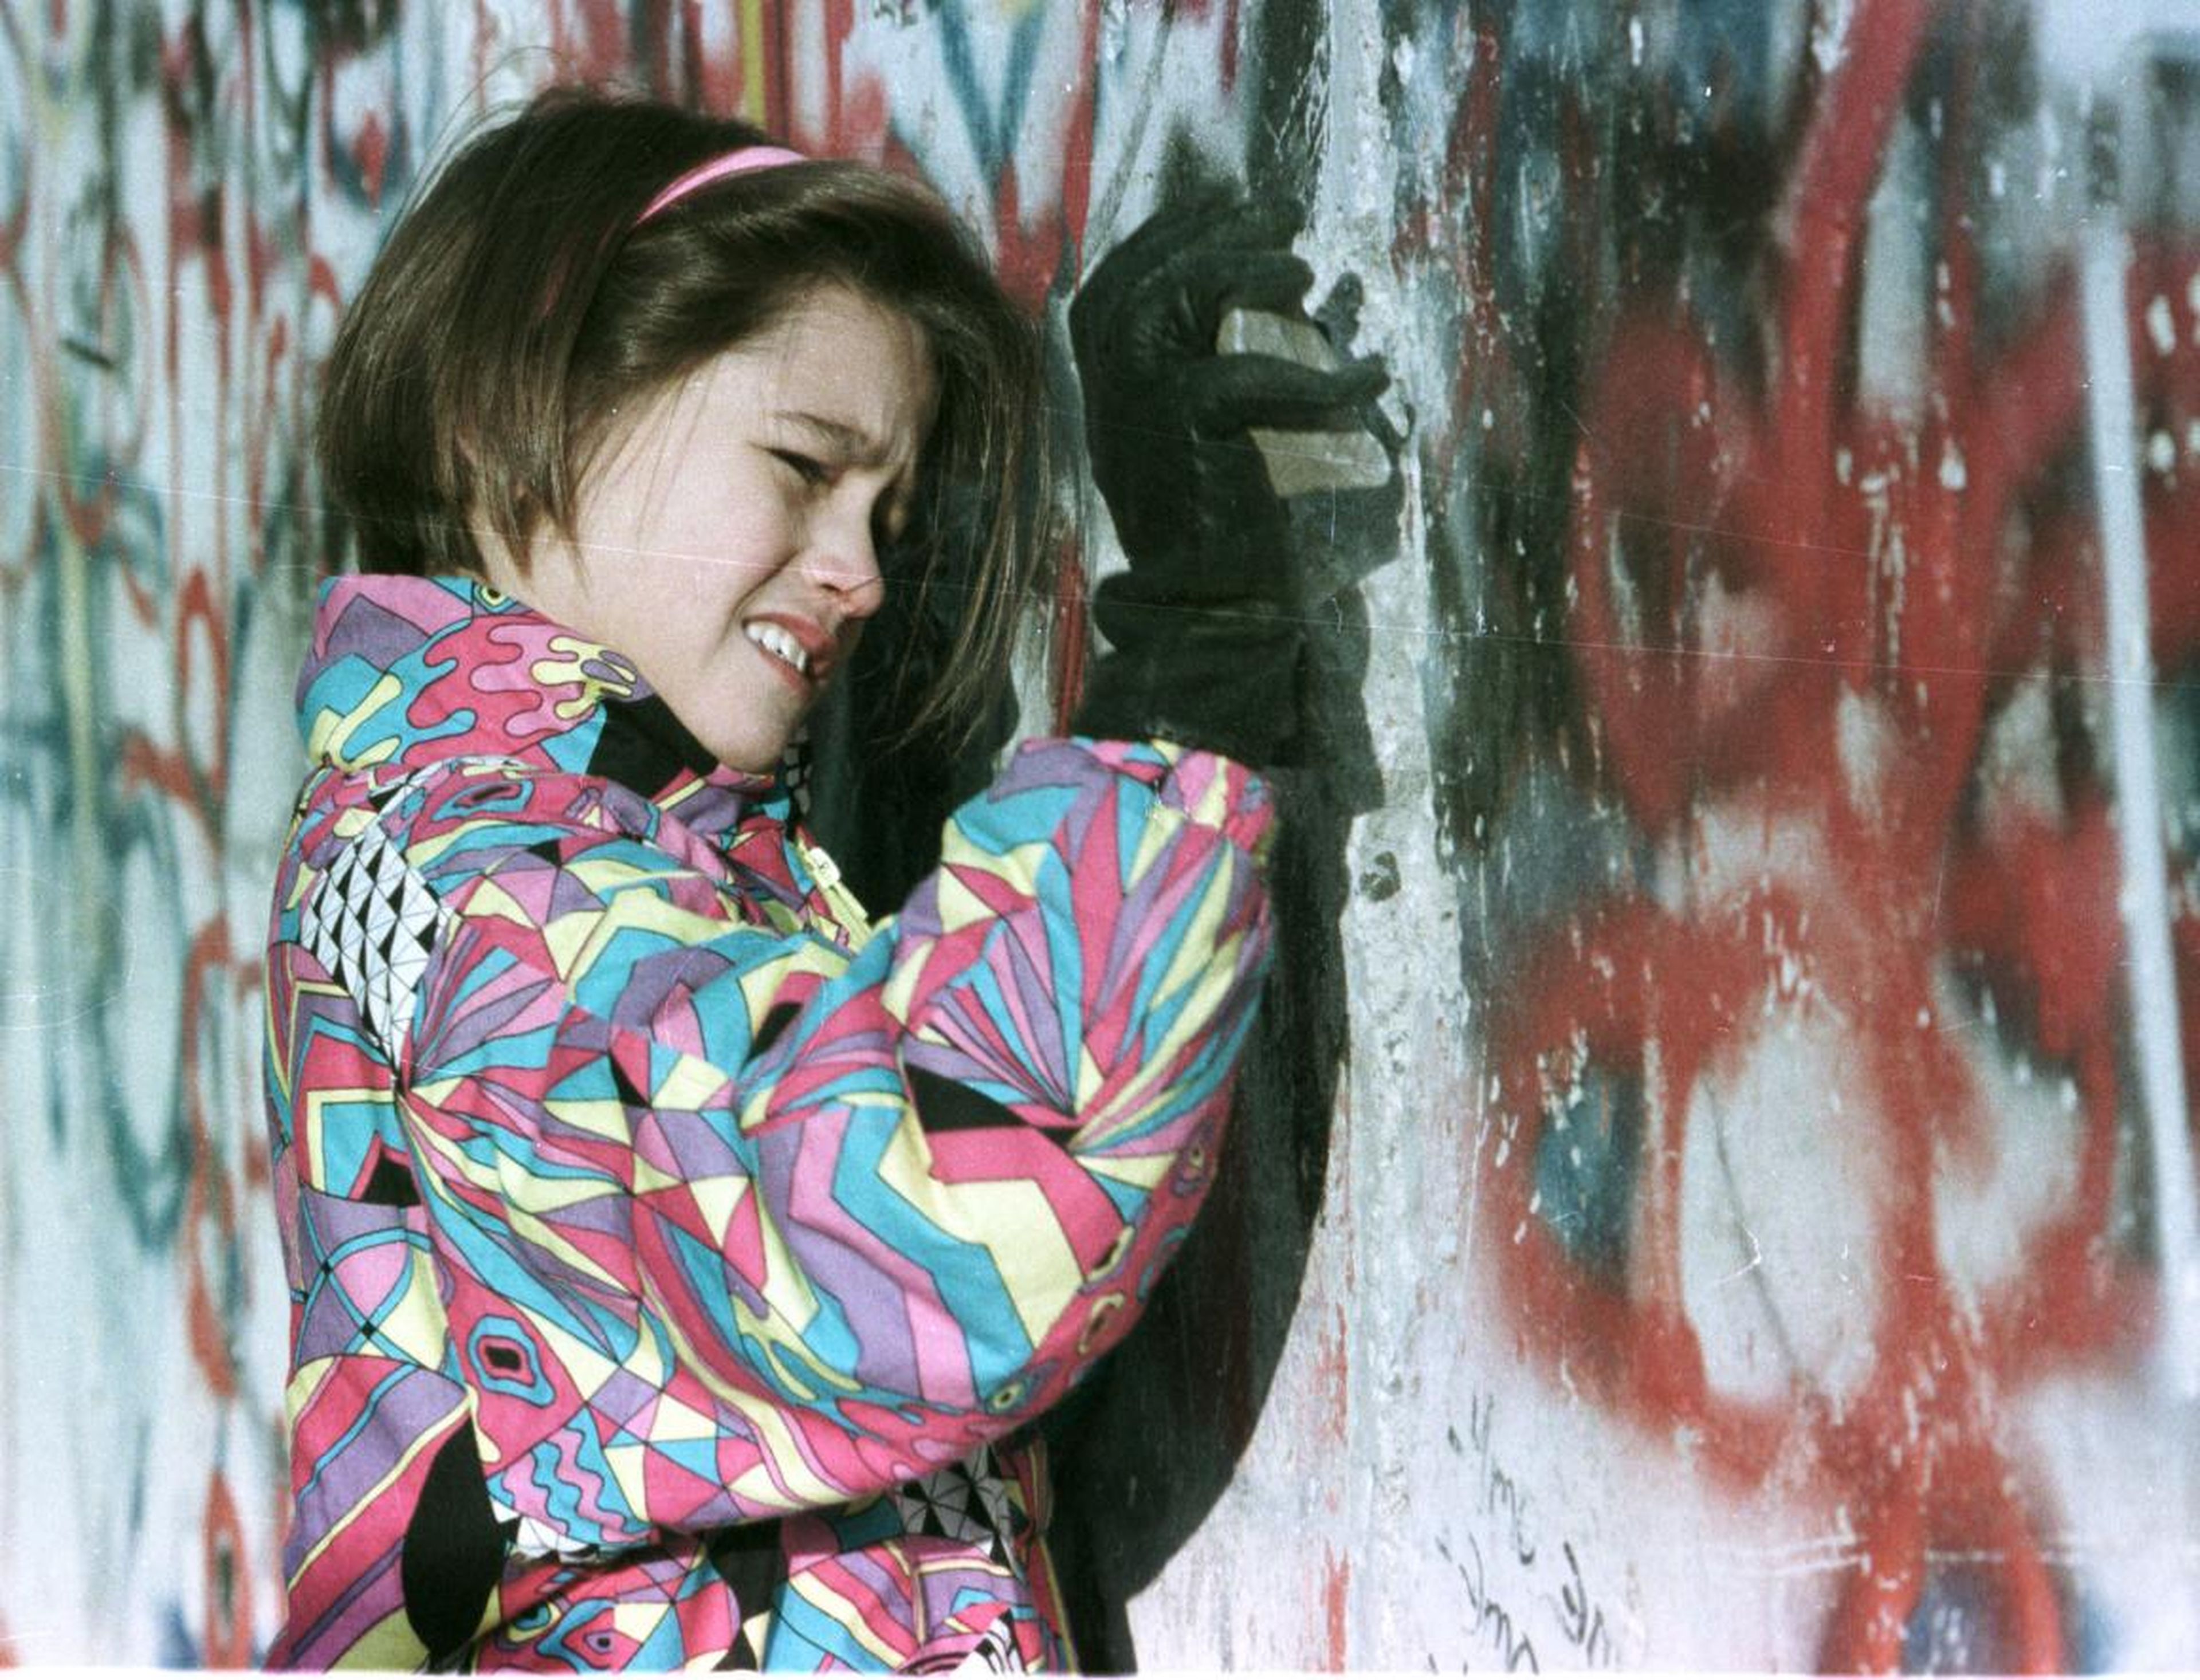 Even days later, citizens wanted to participate in the destruction. Here, a young West German girl hammers the Berlin Wall November 19.